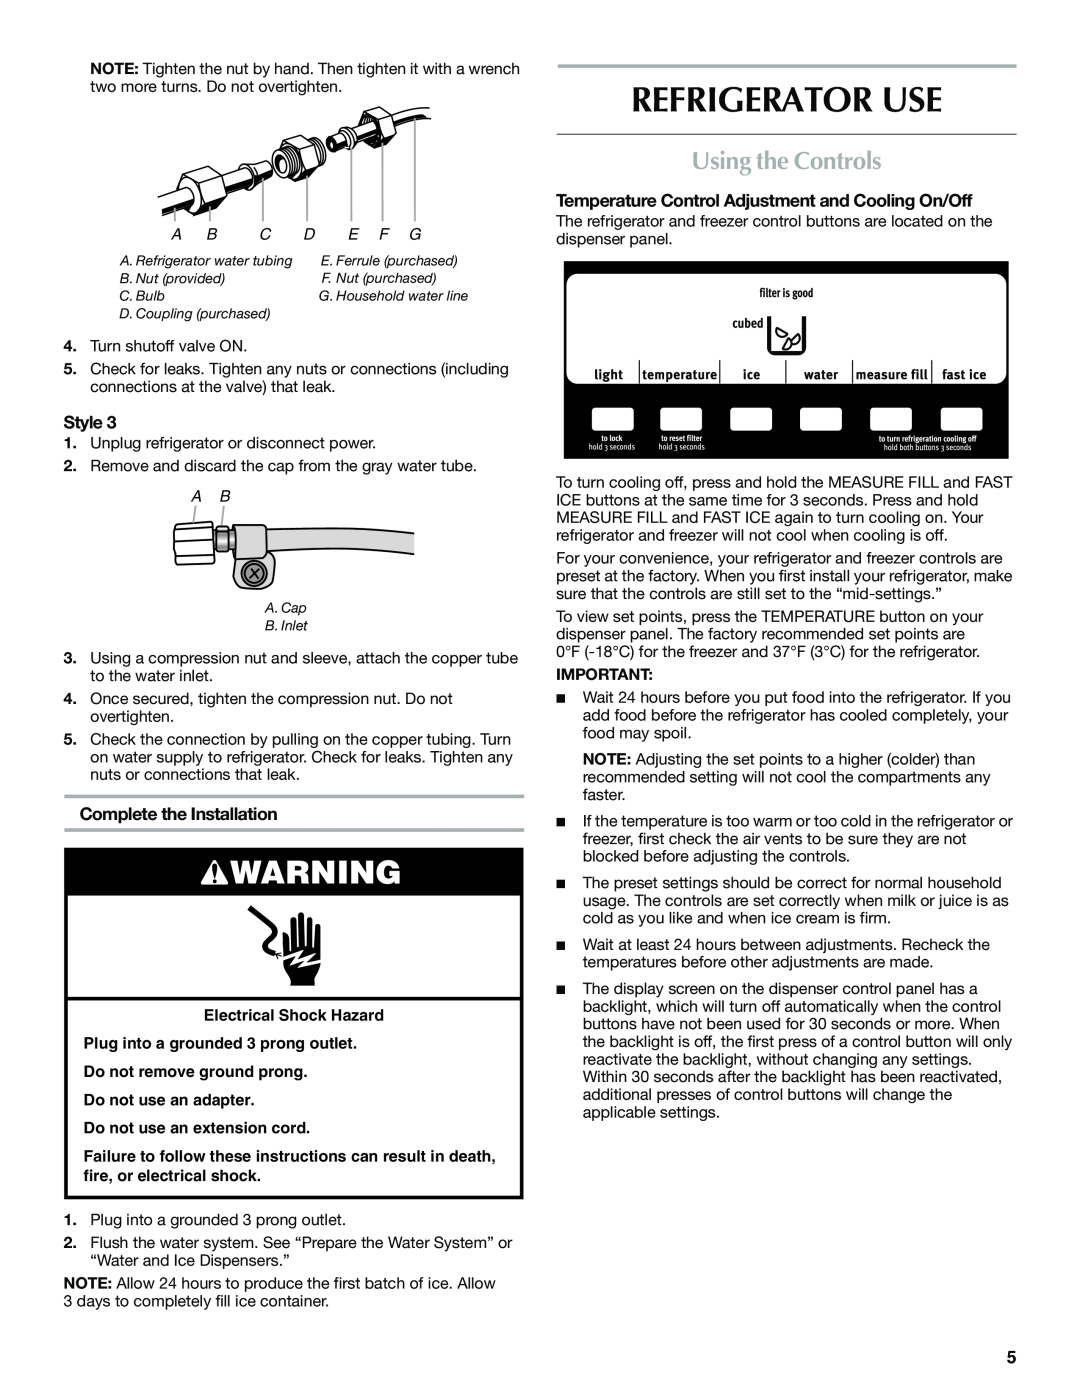 Maytag W10321481A installation instructions Refrigerator Use, Using the Controls, Complete the Installation, E F G, Style 